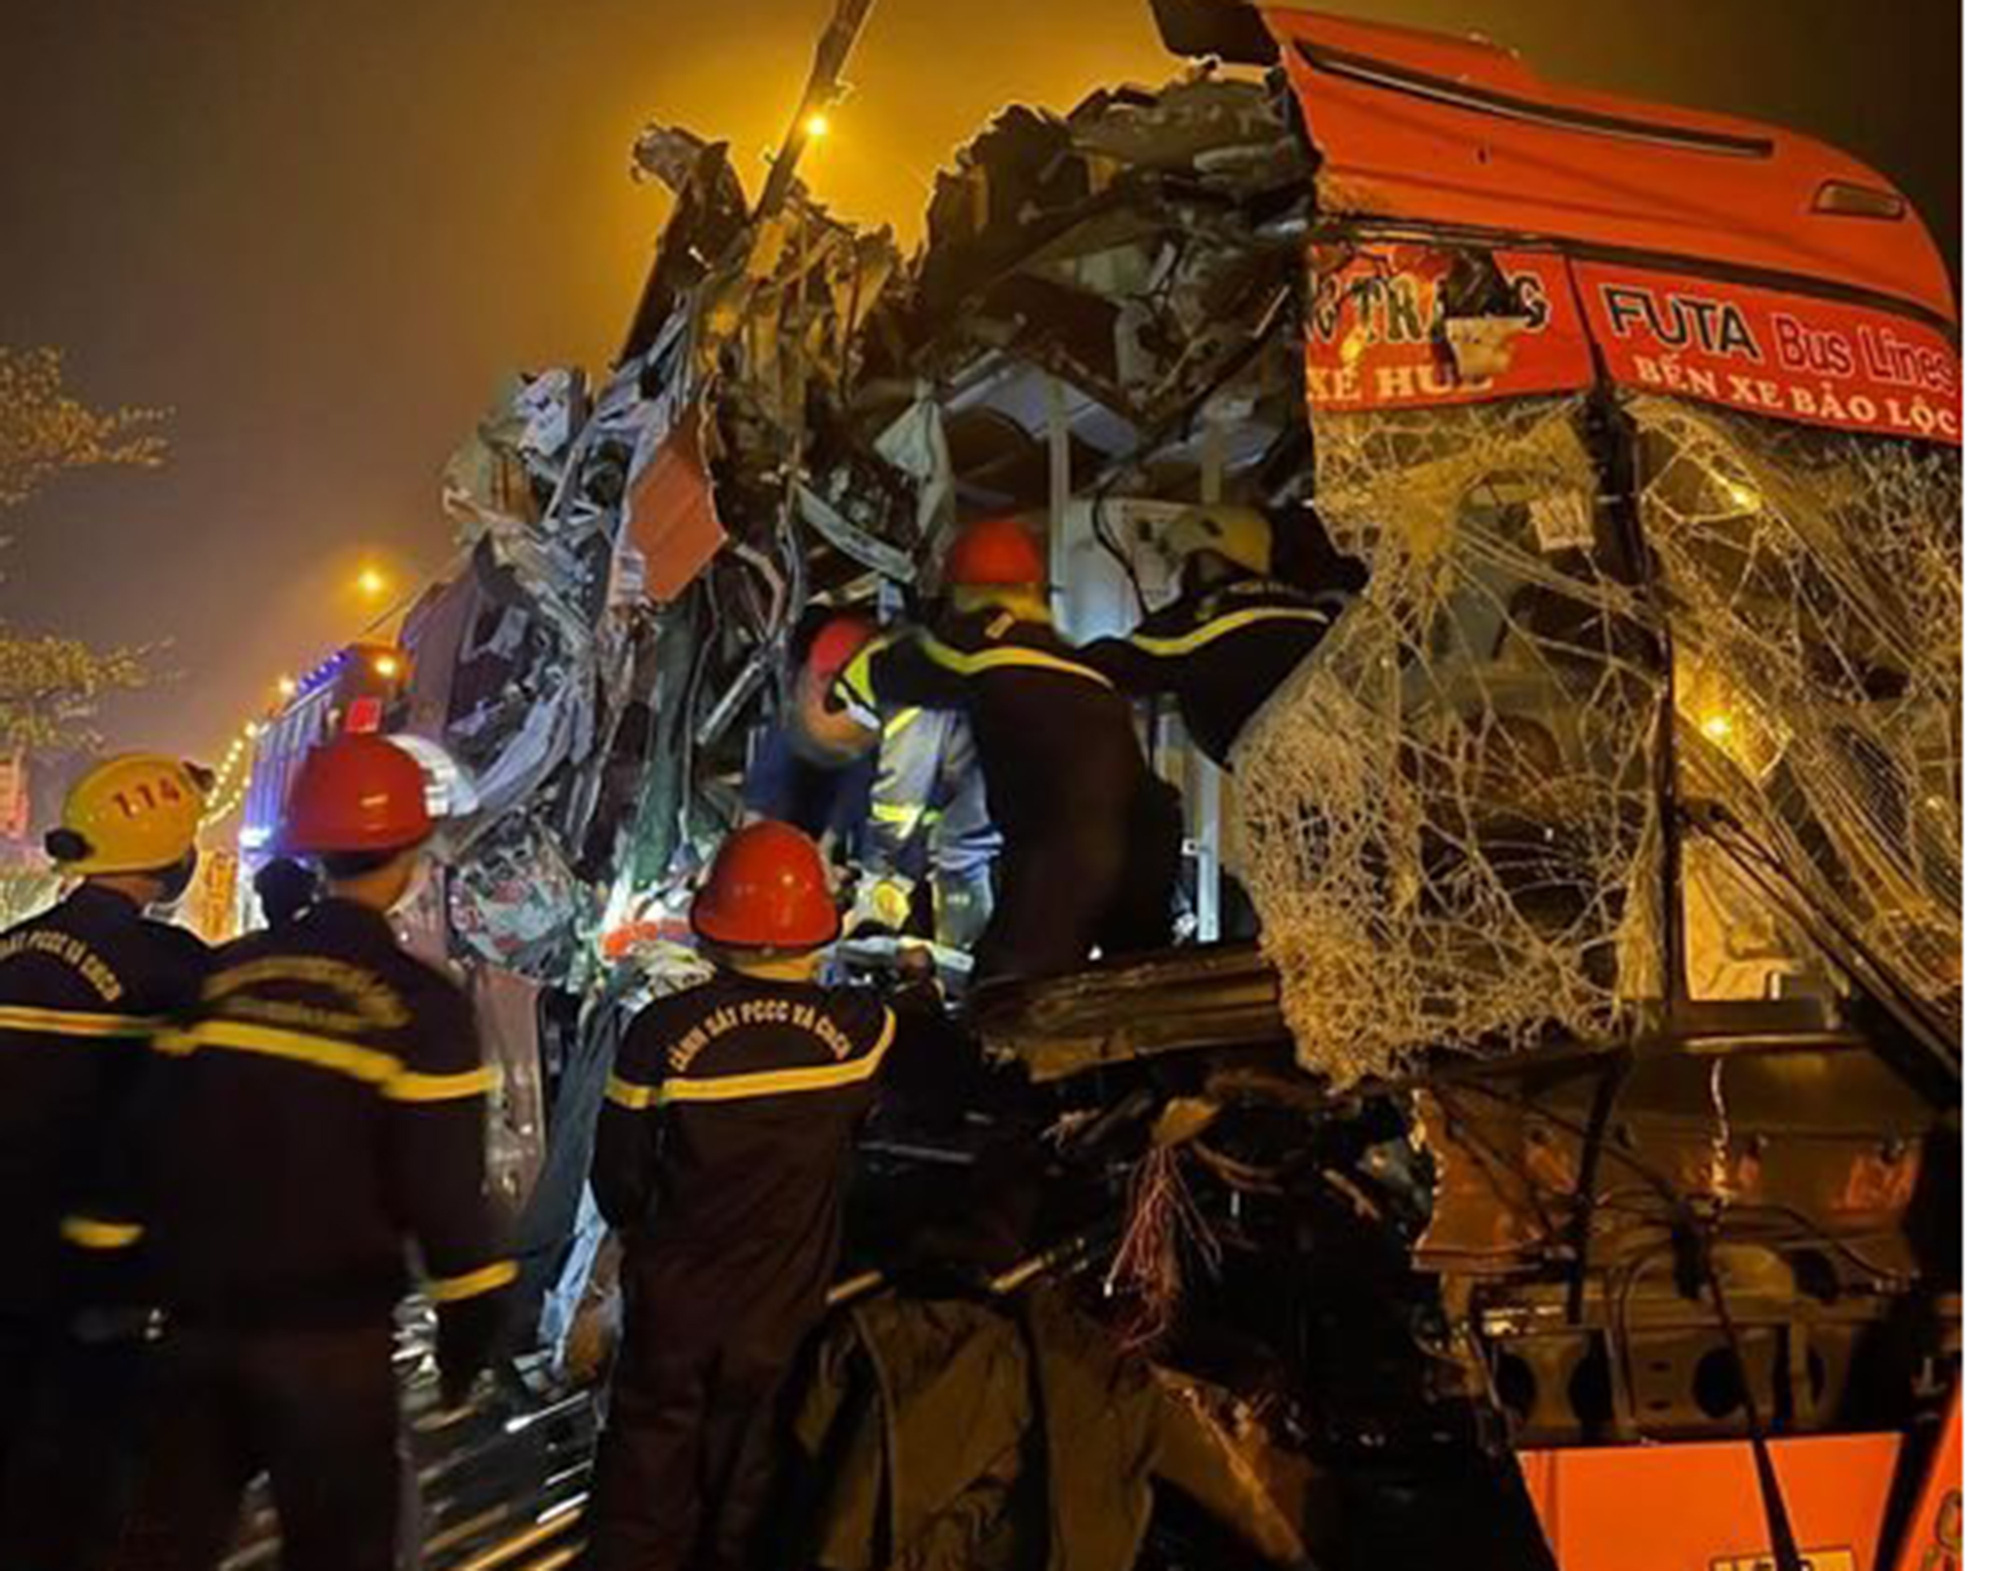 At least 3 dead, 17 injured after long-haul bus hits truck in central Vietnam